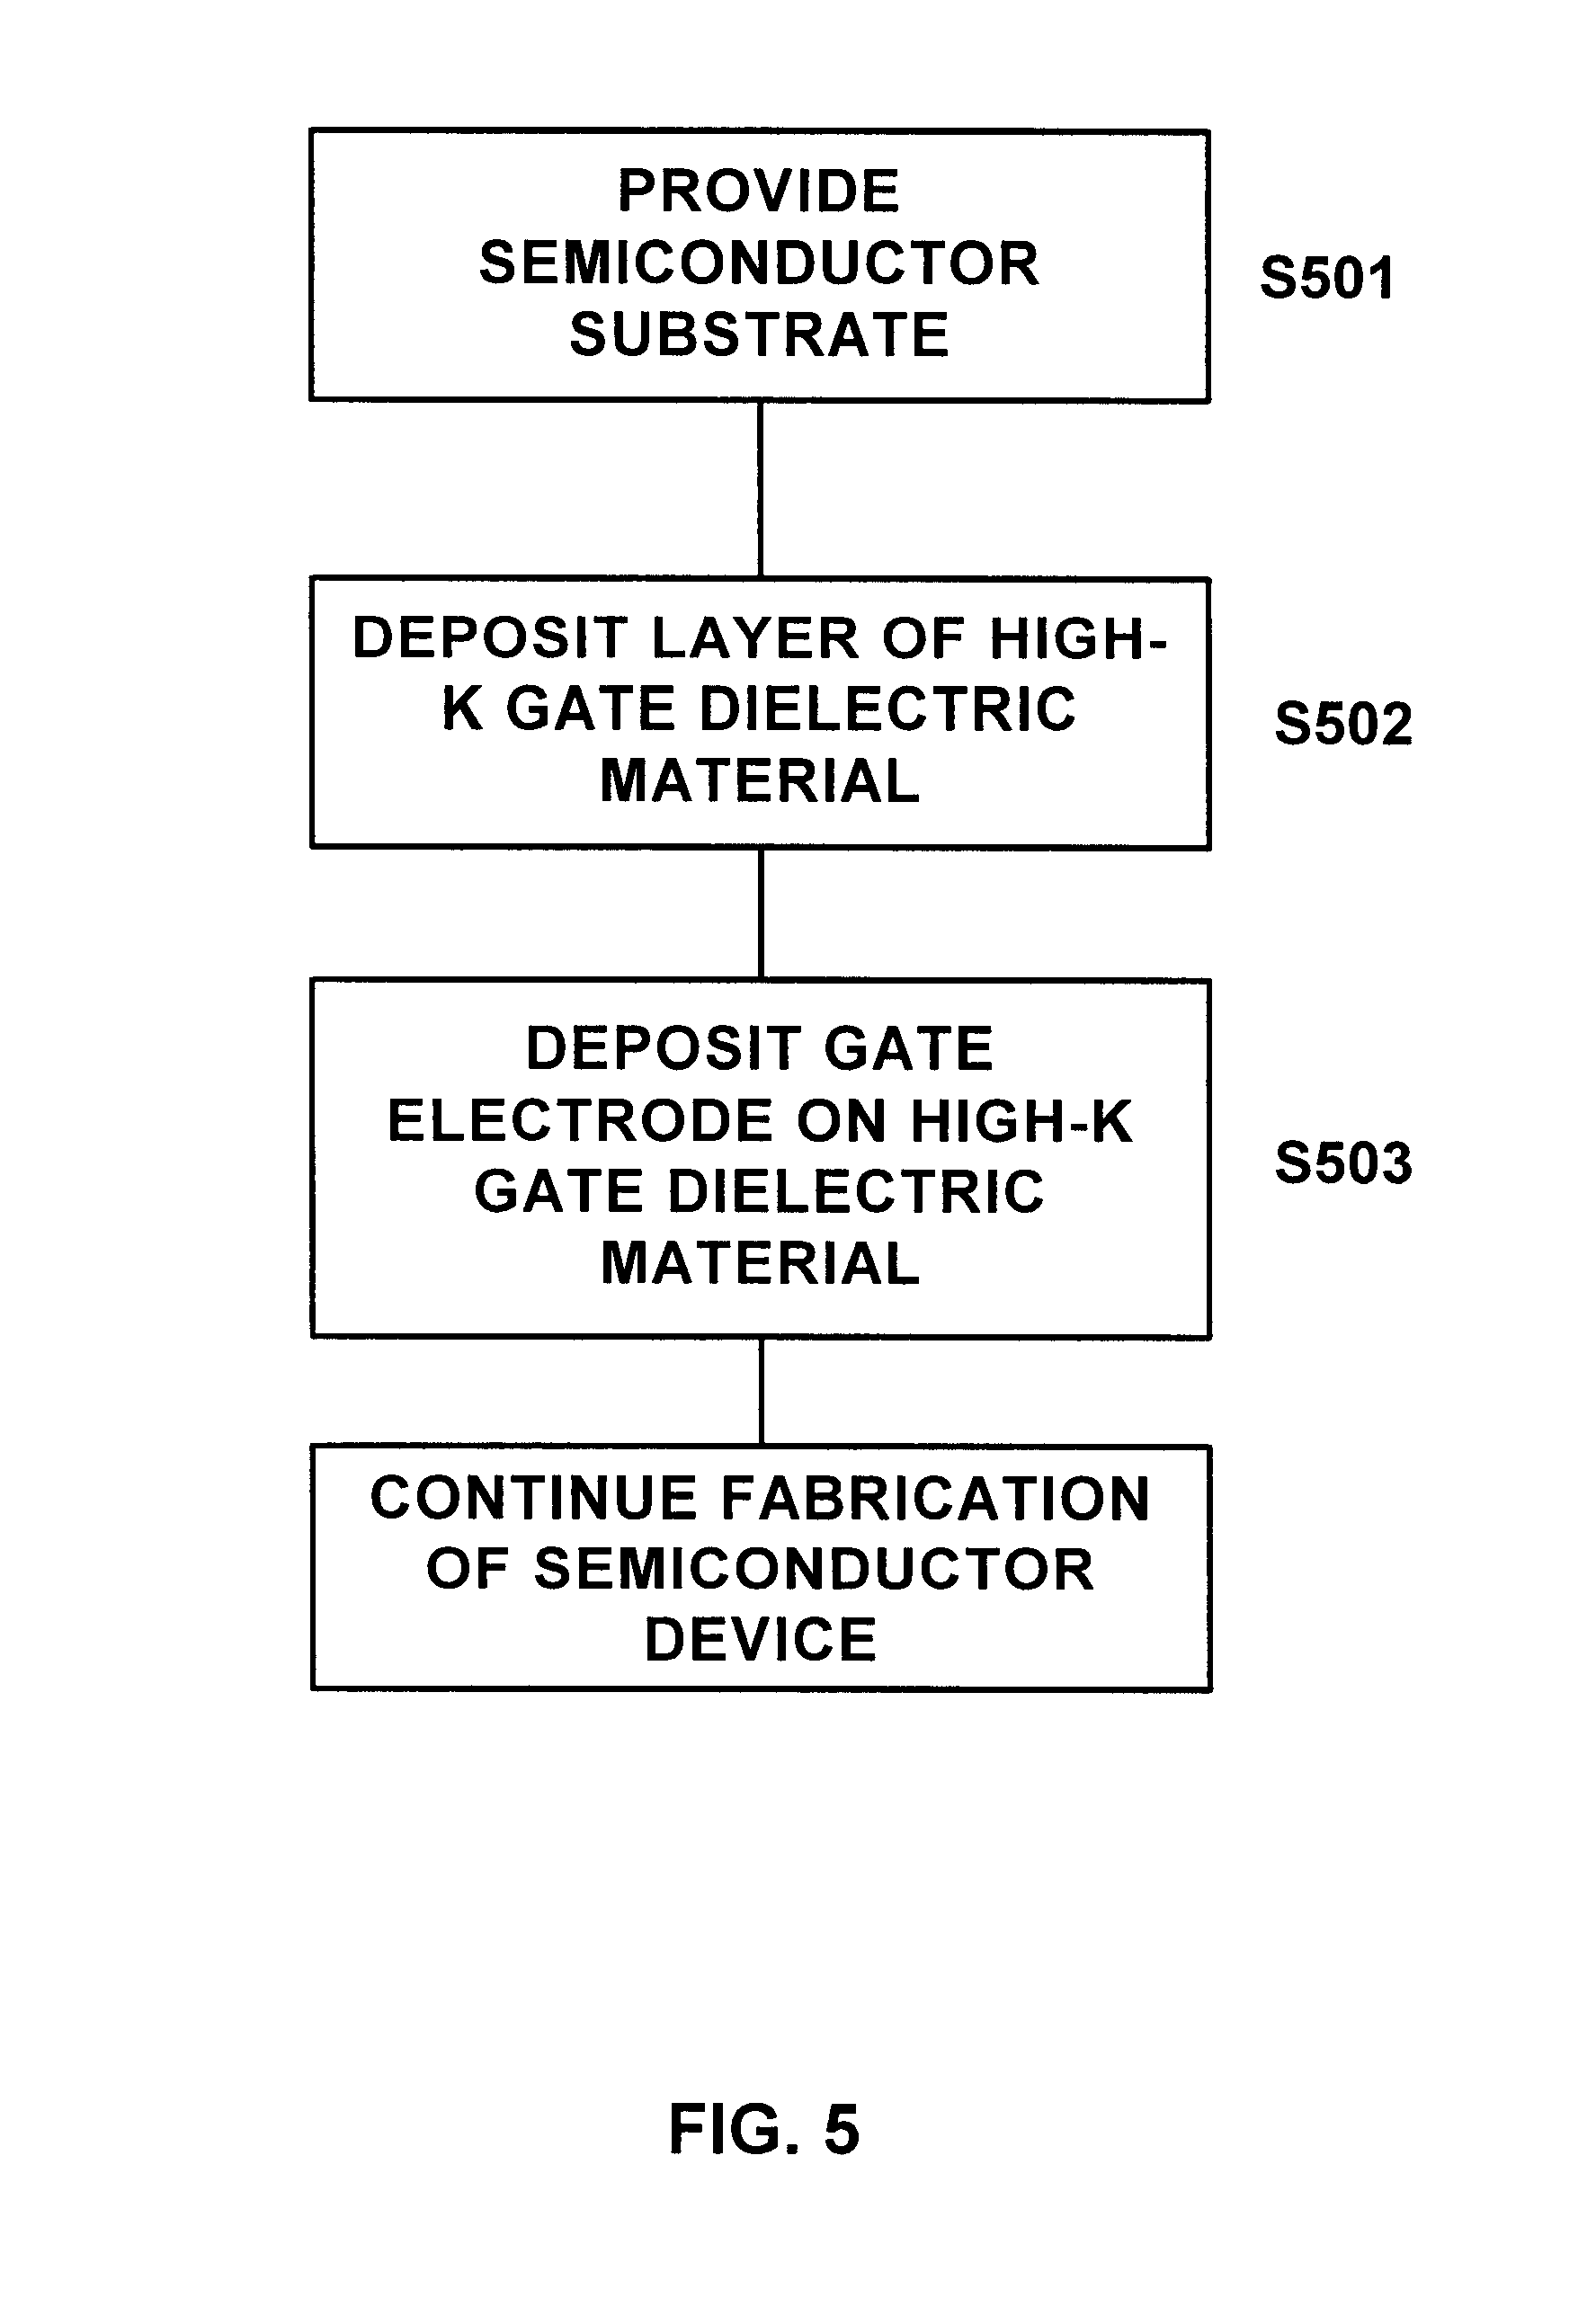 Non-reducing process for deposition of polysilicon gate electrode over high-K gate dielectric material